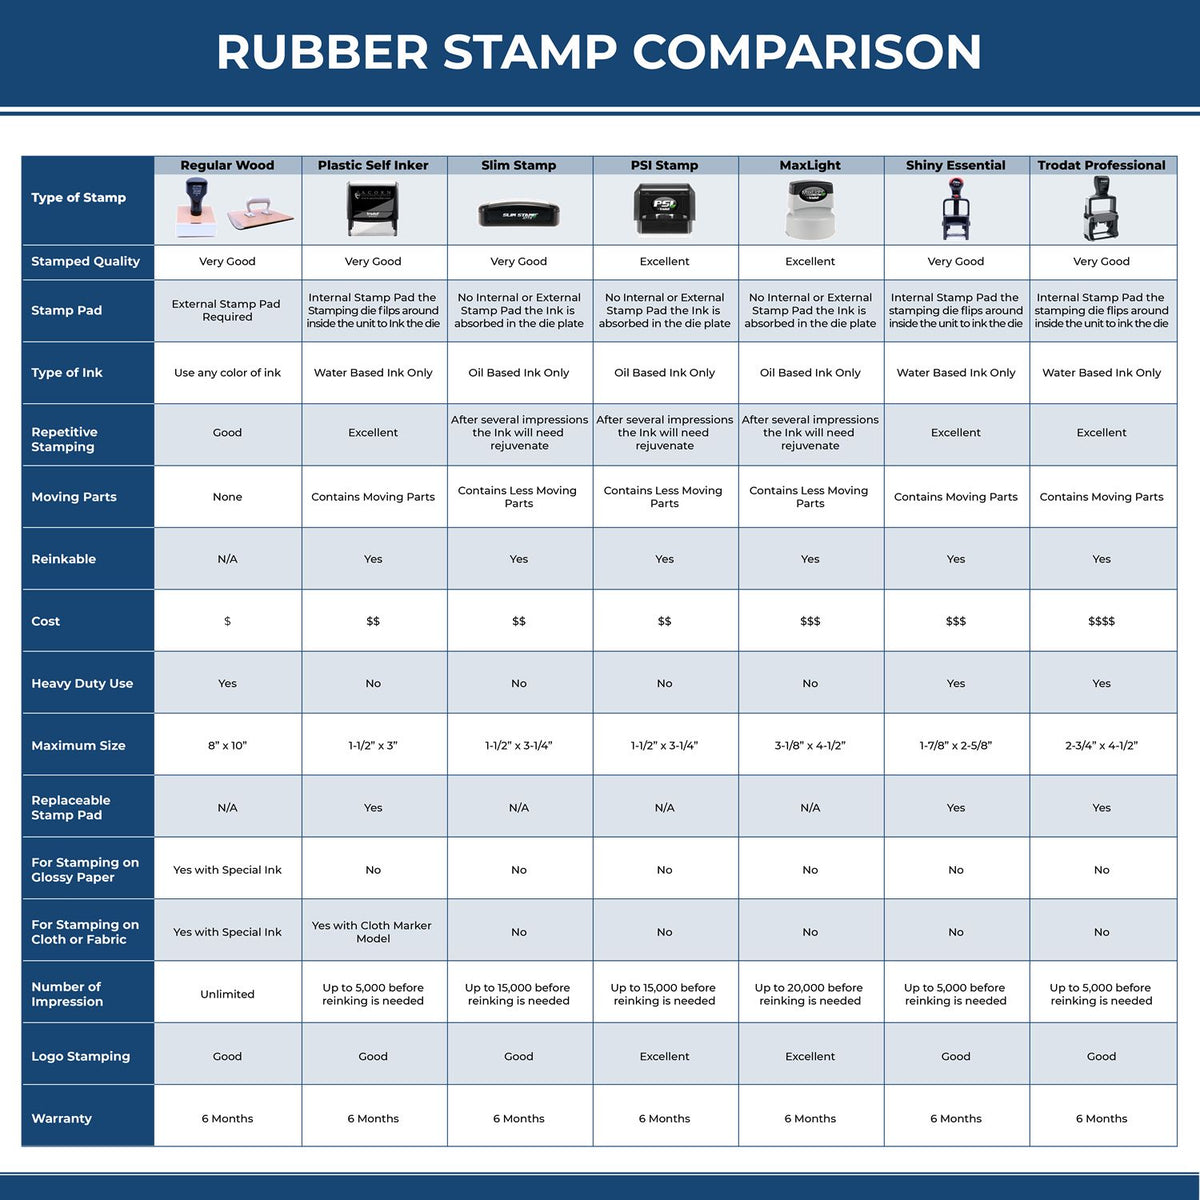 A comparison chart for the different types of mount models available for the Premium MaxLight Pre-Inked Florida Engineering Stamp.